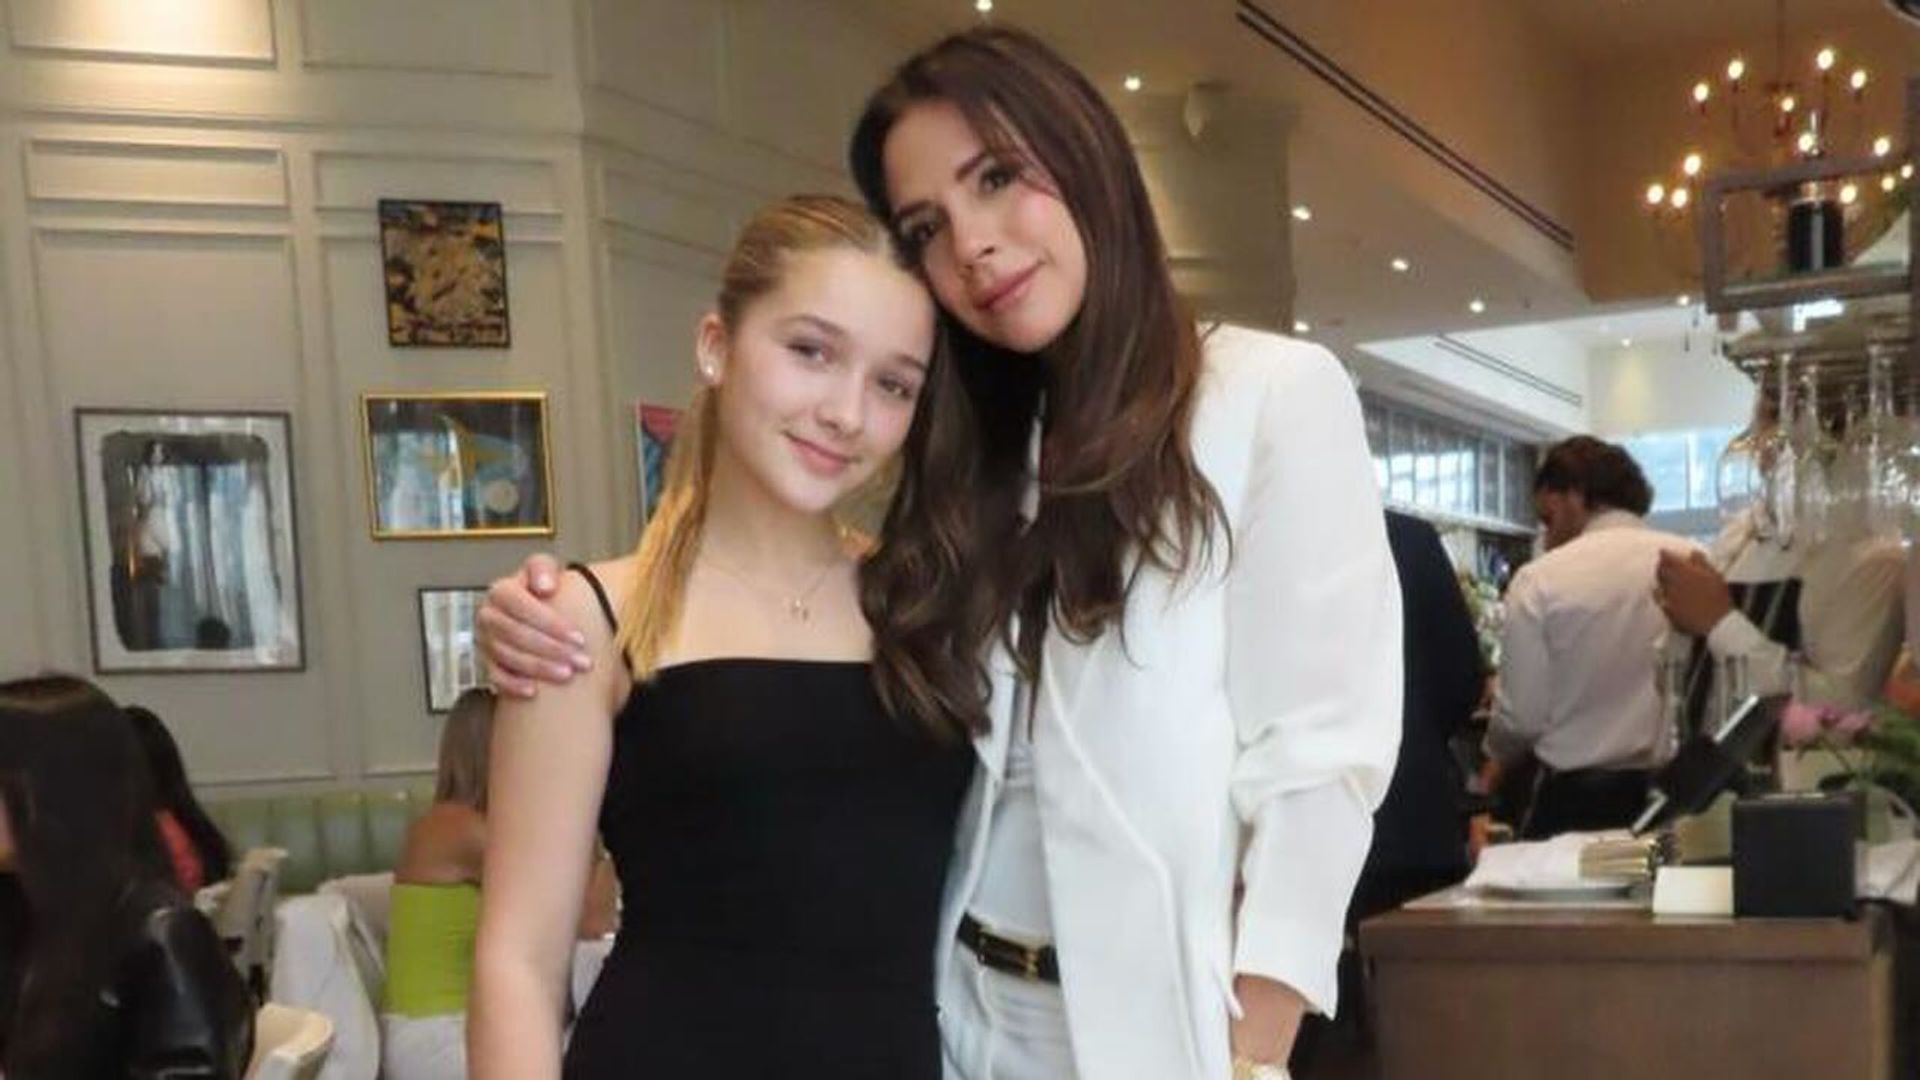 Victoria Beckham in white suit and harper in black dress